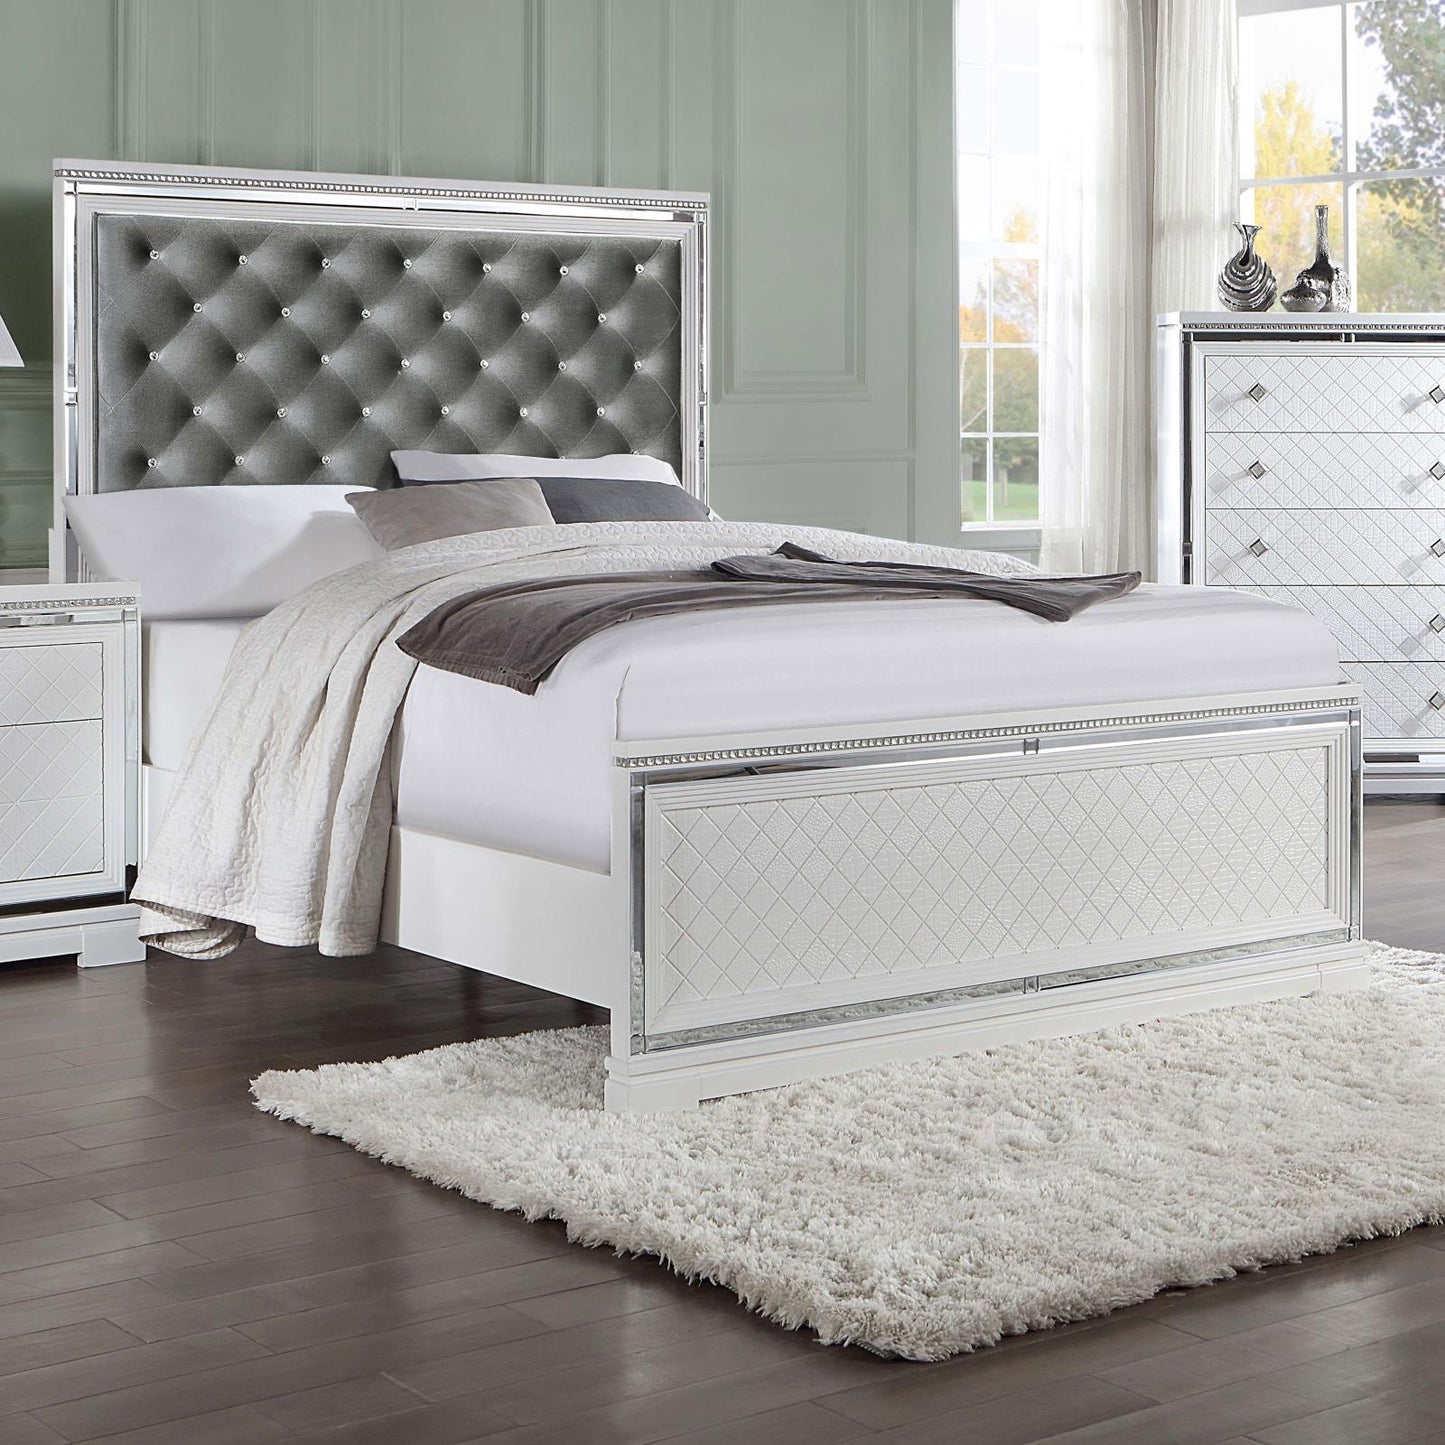 Eleanor Upholstered Tufted Bed White